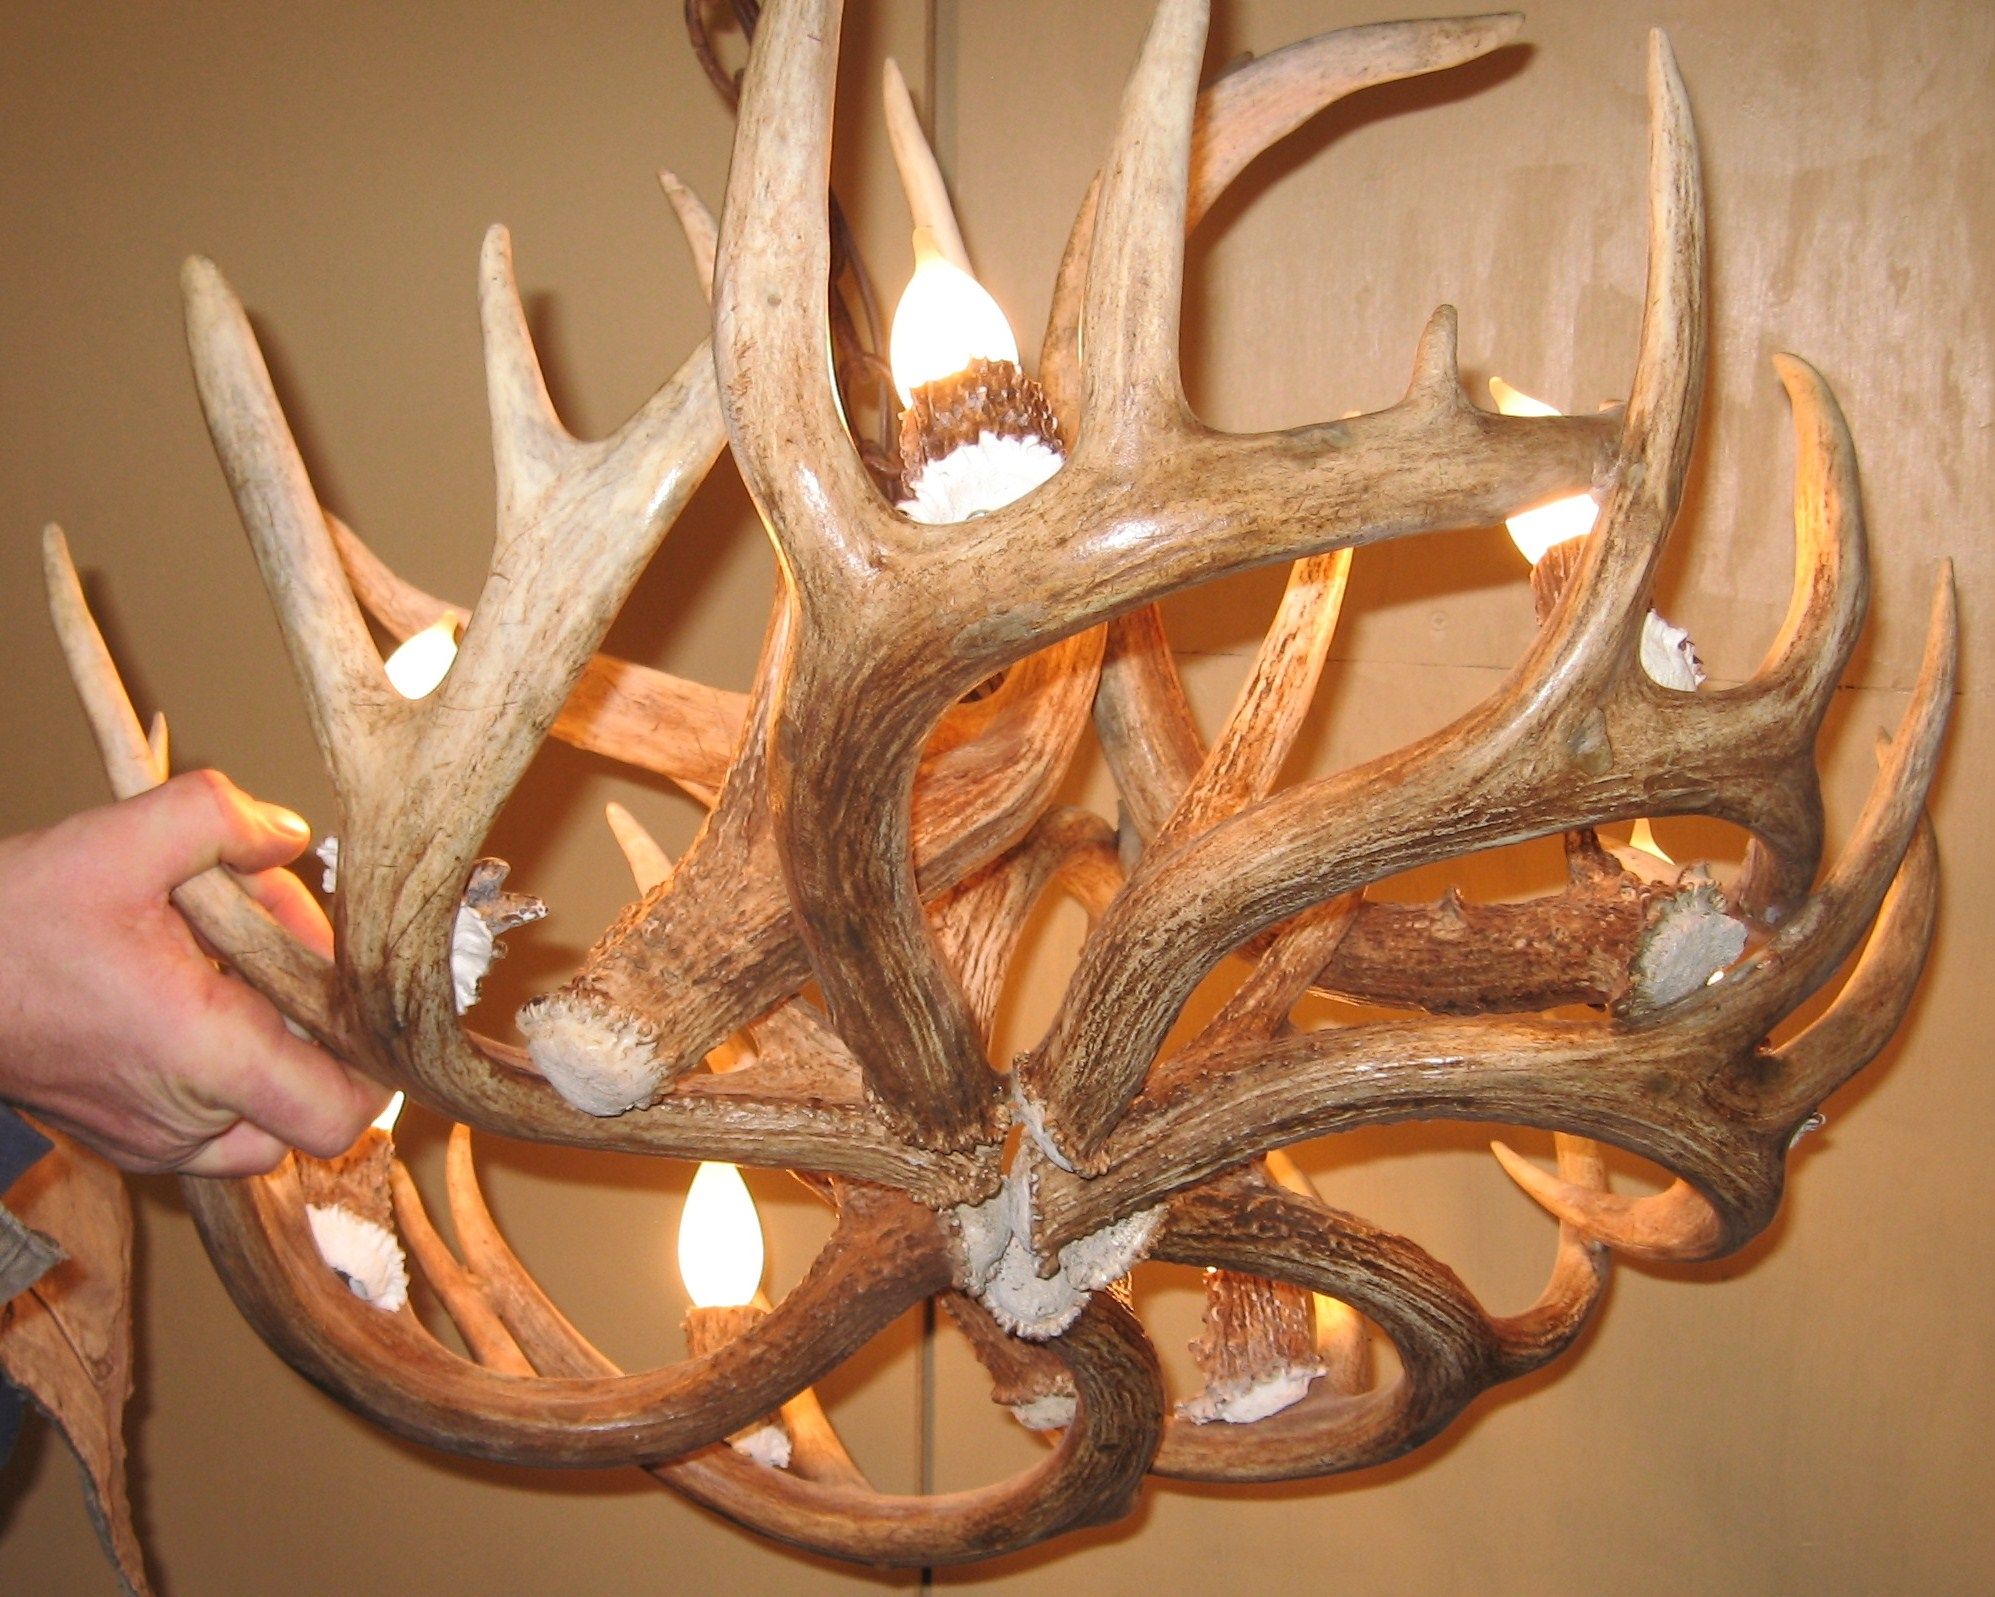 Round Whitetail Deer Antler Chandelier Intended For Antlers Chandeliers (View 4 of 12)